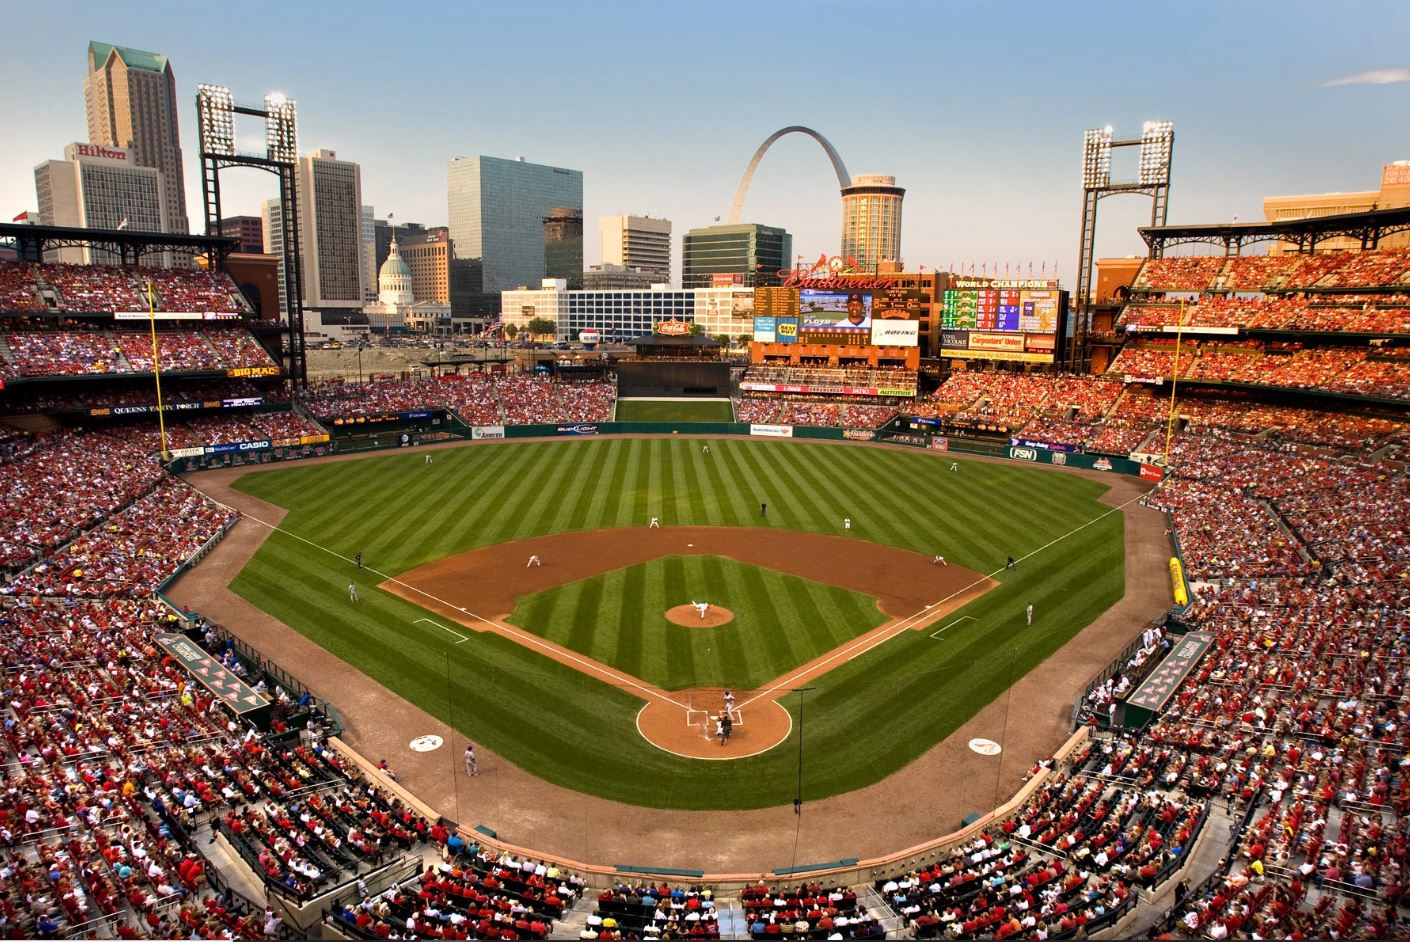 Changes at Busch Stadium for the 2021 season